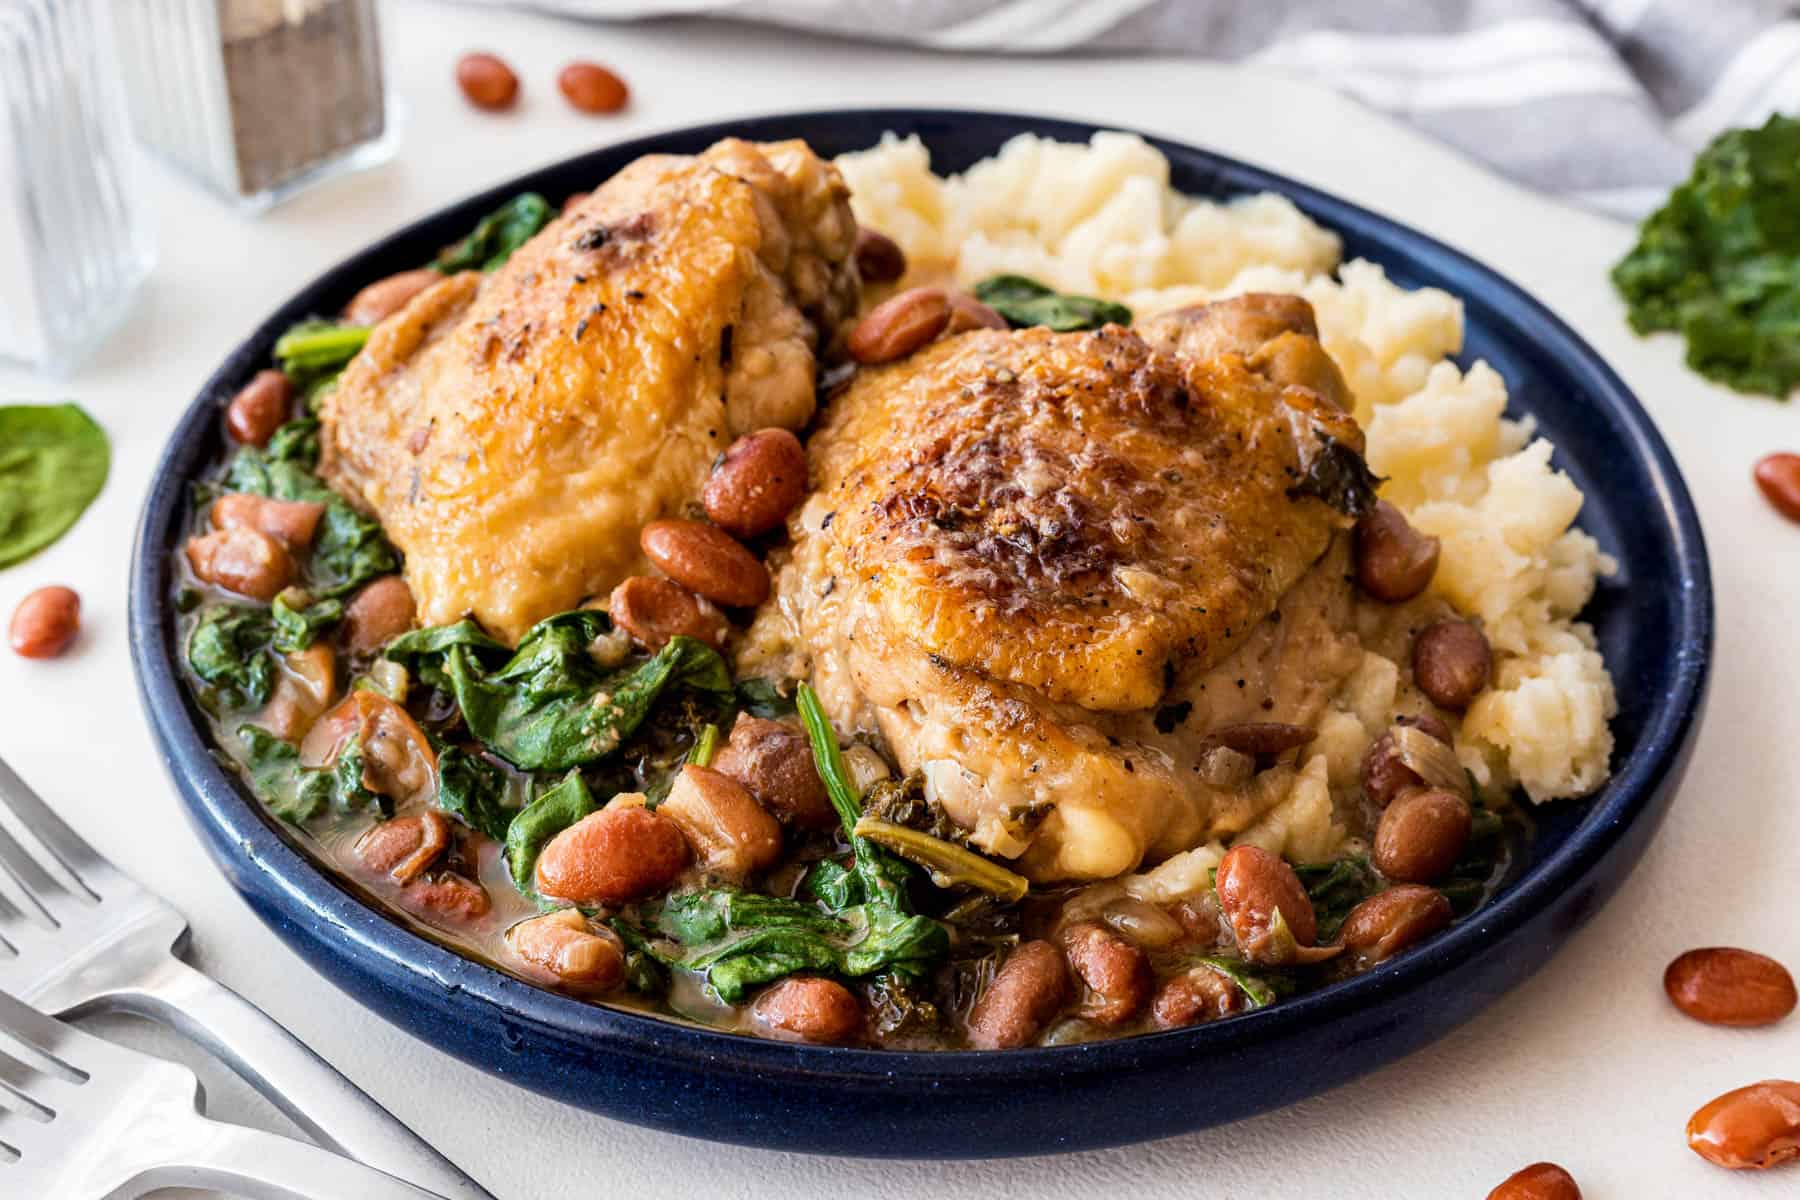 Chicken thighs with beans and greens over mashed potatoes. 